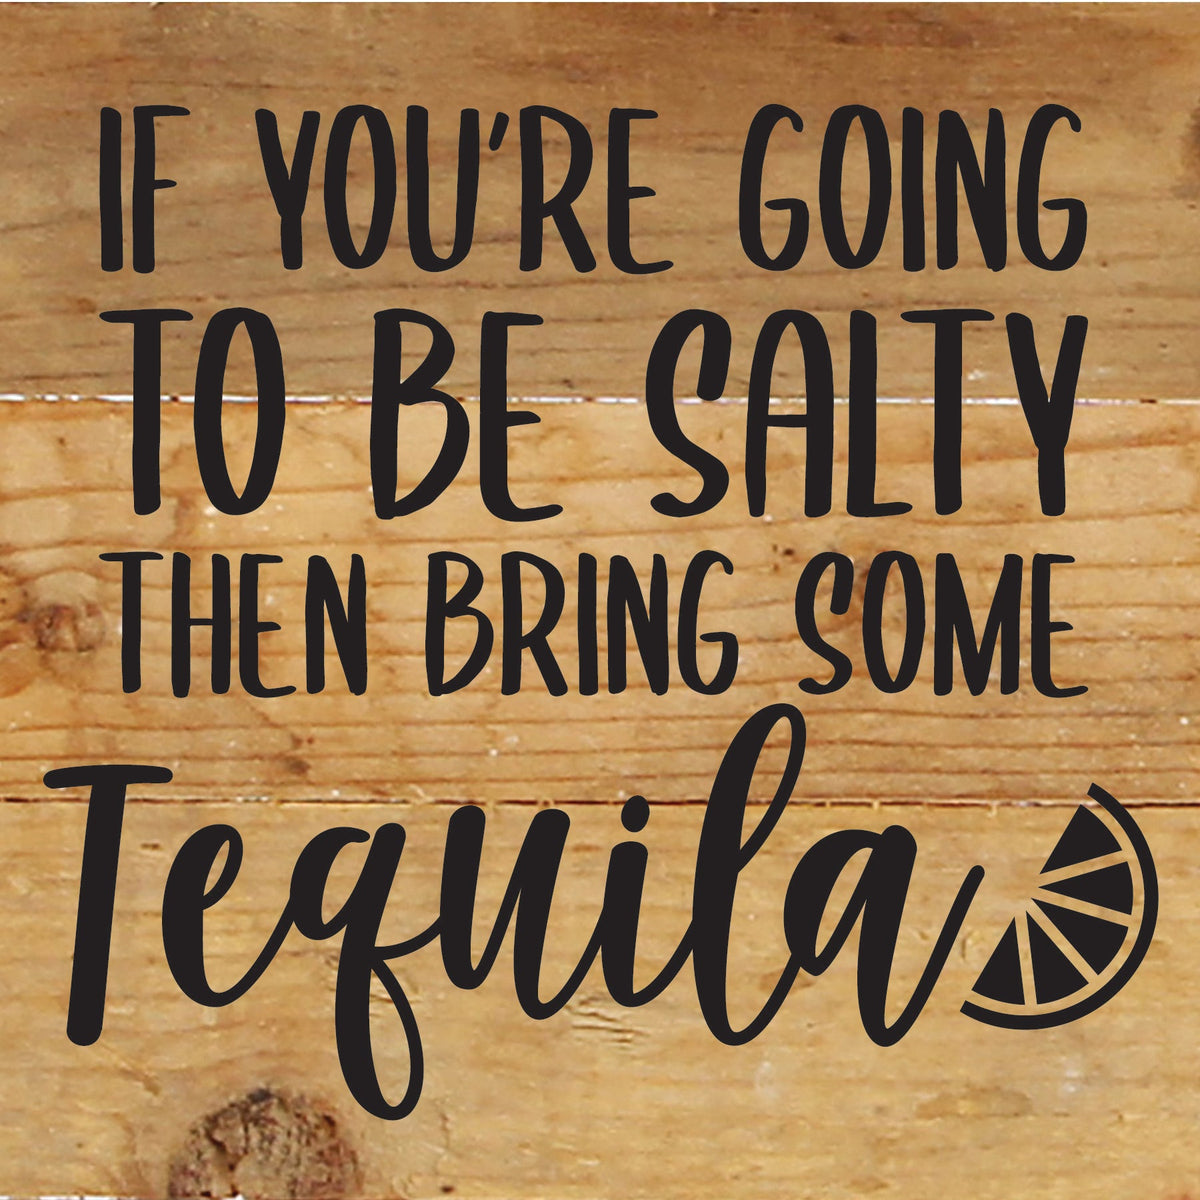 If you are going to be salty then bring some tequila / 6x6 Reclaimed Wood Sign